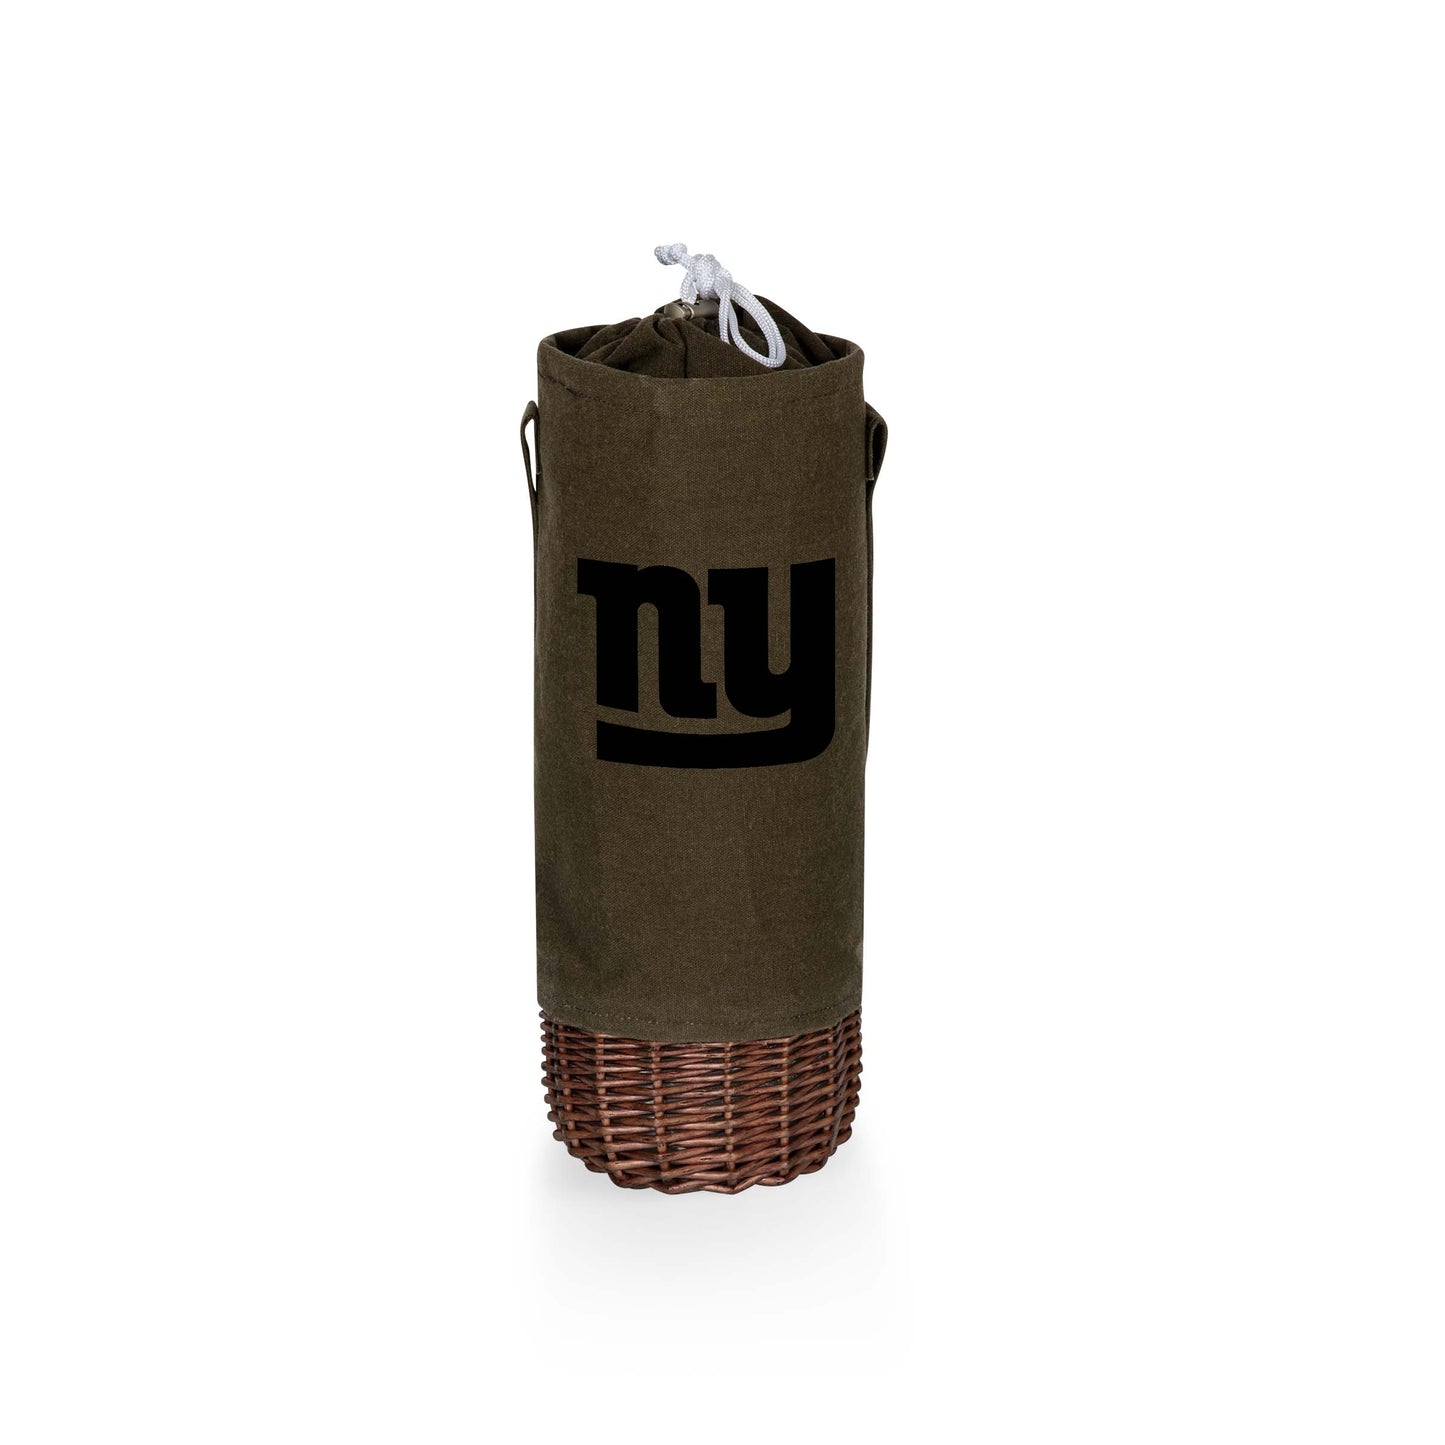 New York Giants - Malbec Insulated Canvas and Willow Wine Bottle Basket